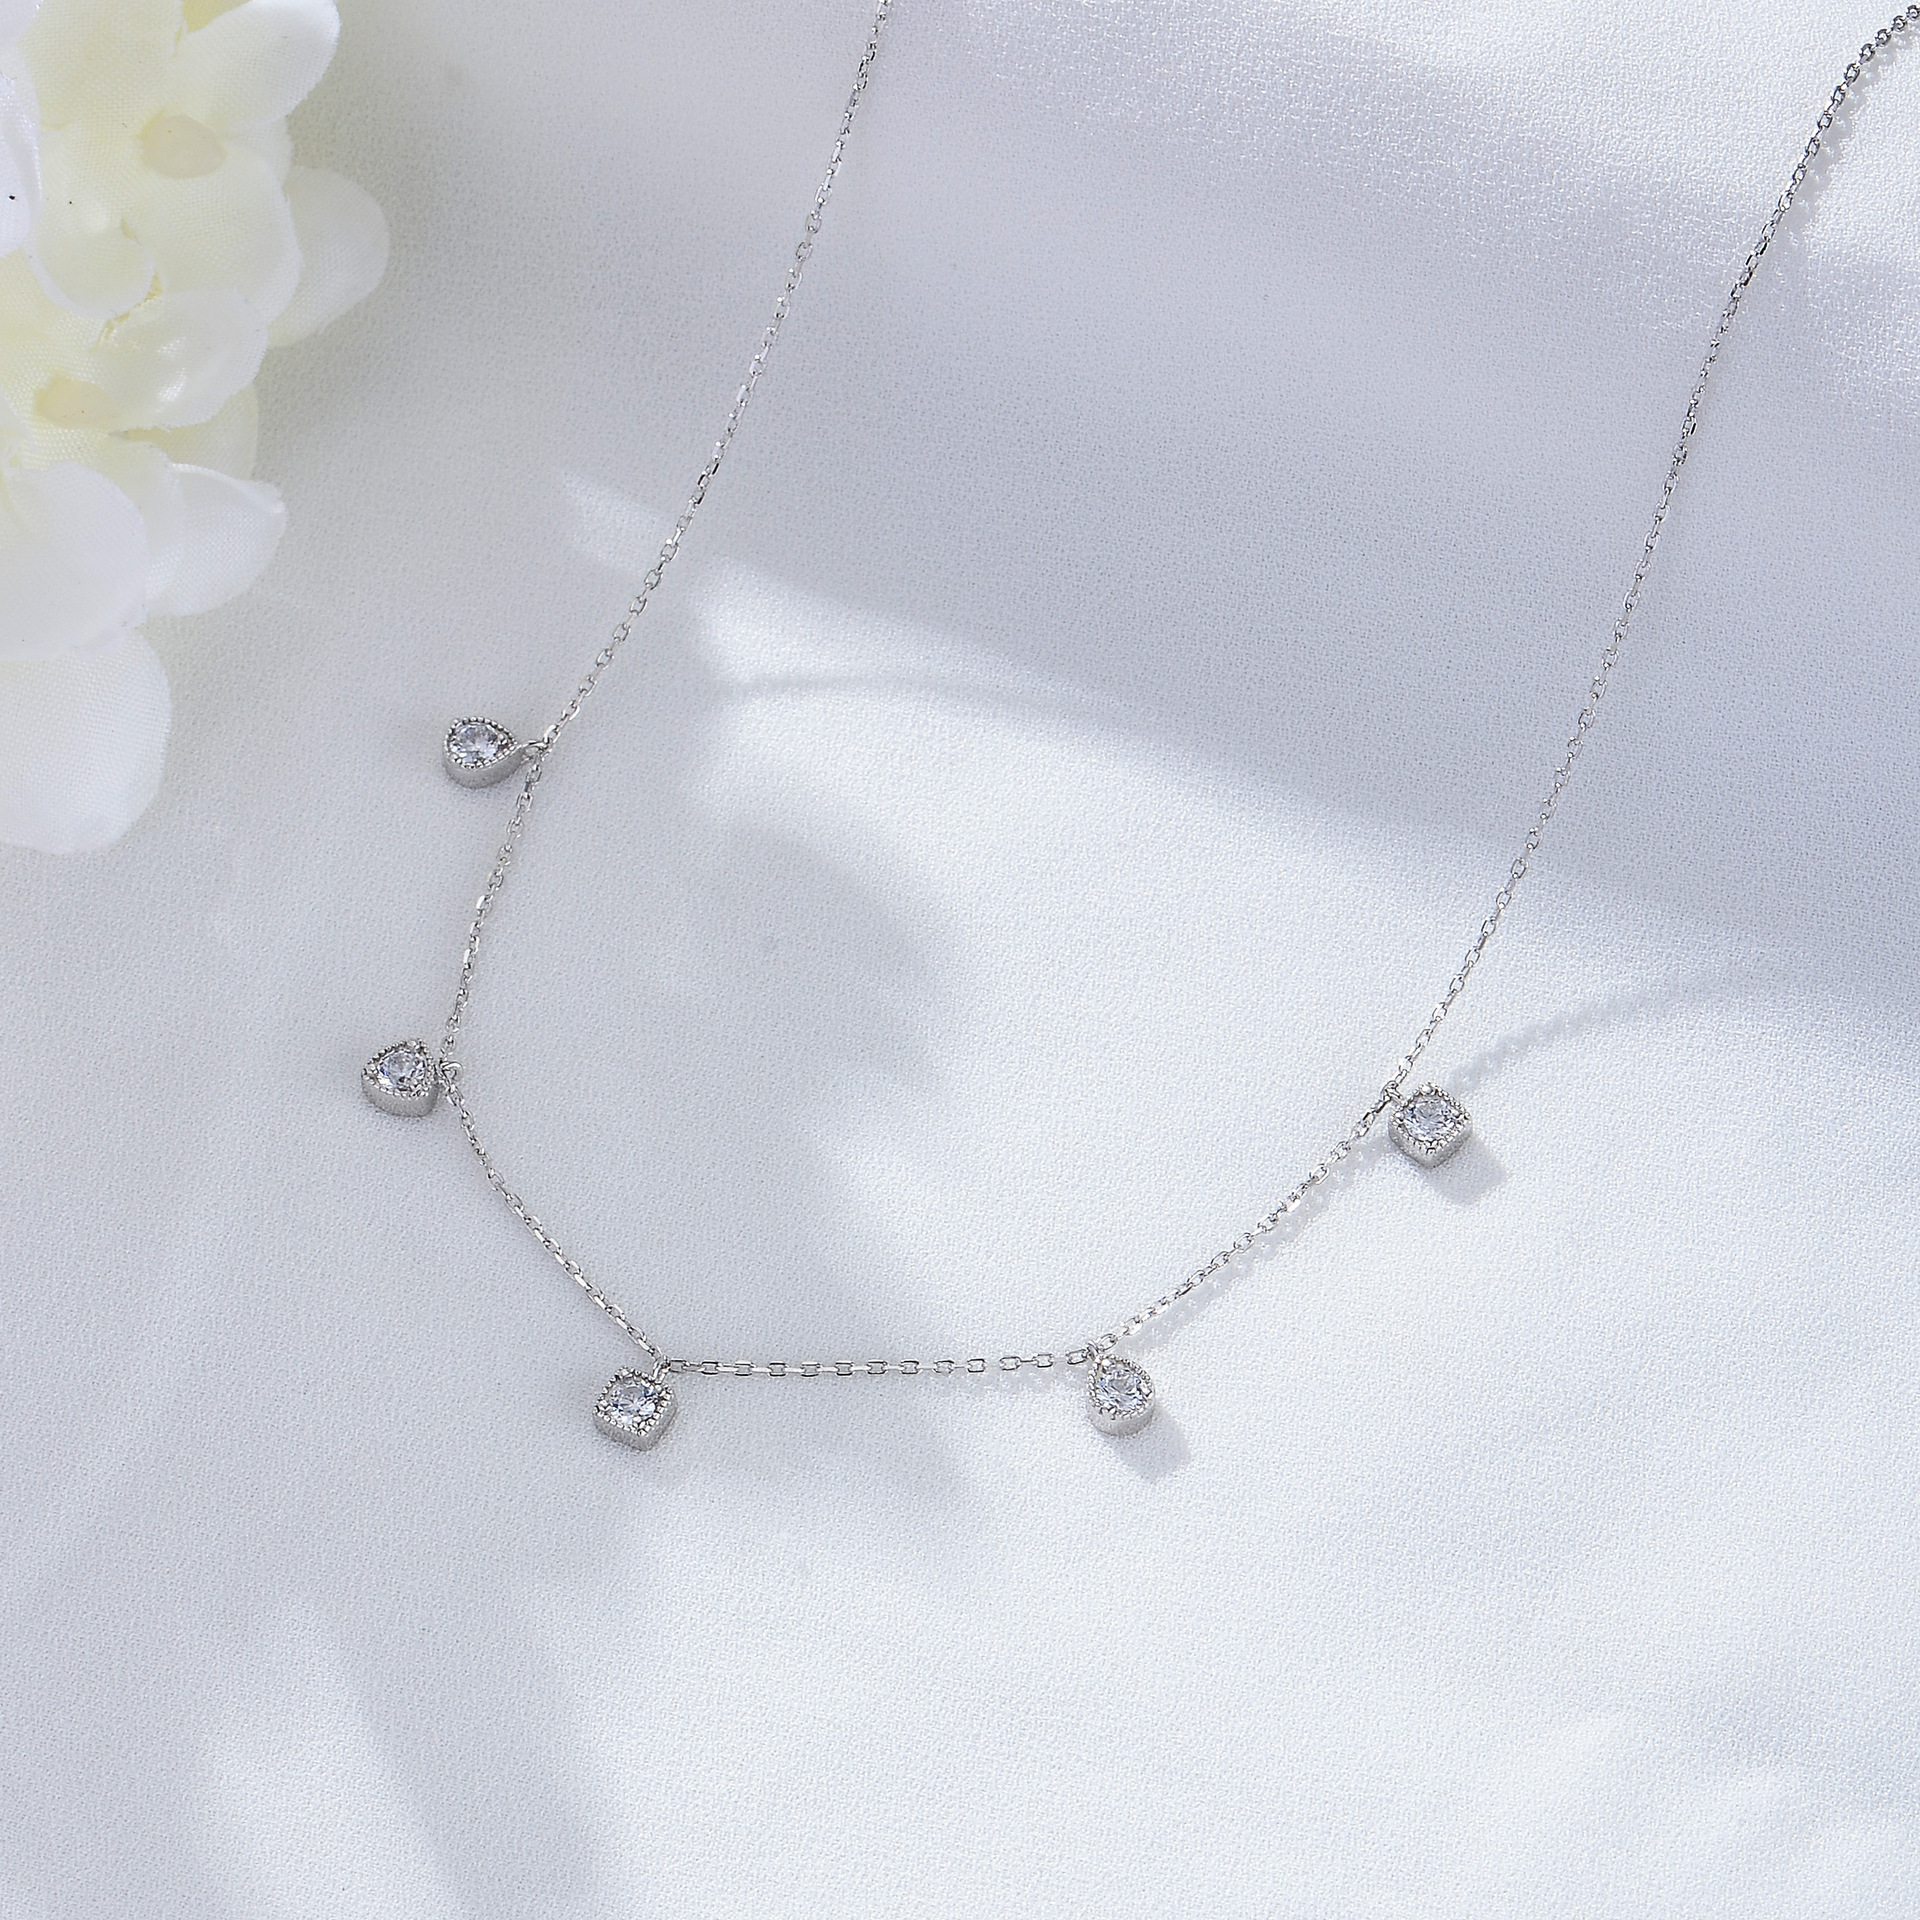 Classic Small Cube Sugar Handmade Series S925 Sterling Silver Necklace-BlingRunway